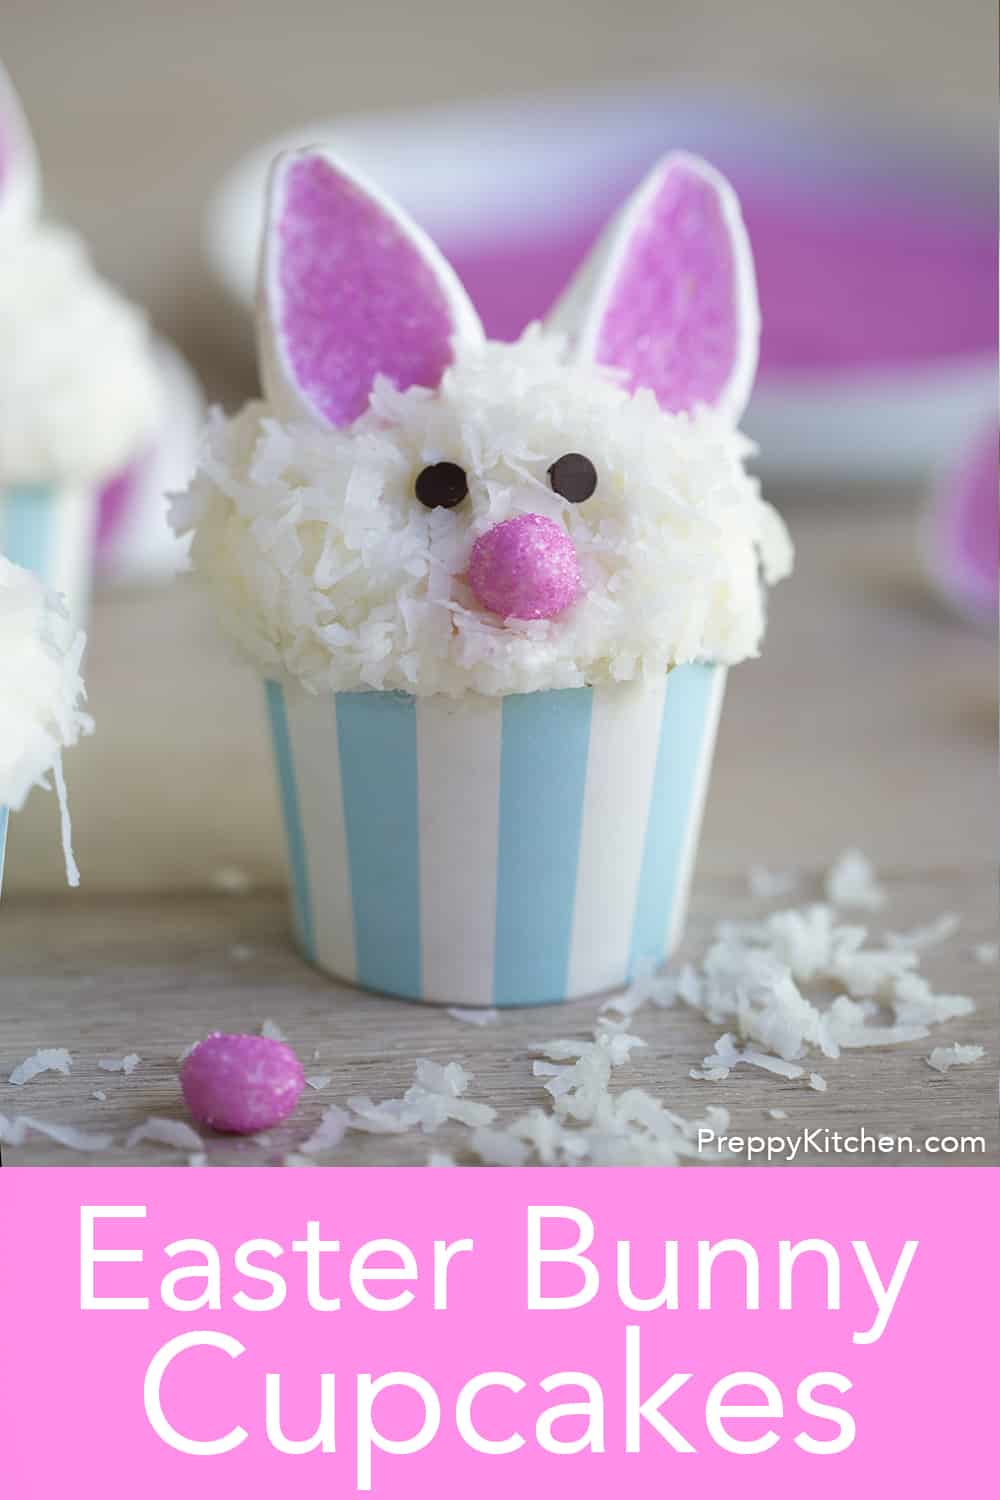 Easter Bunny Cupcakes - Preppy Kitchen